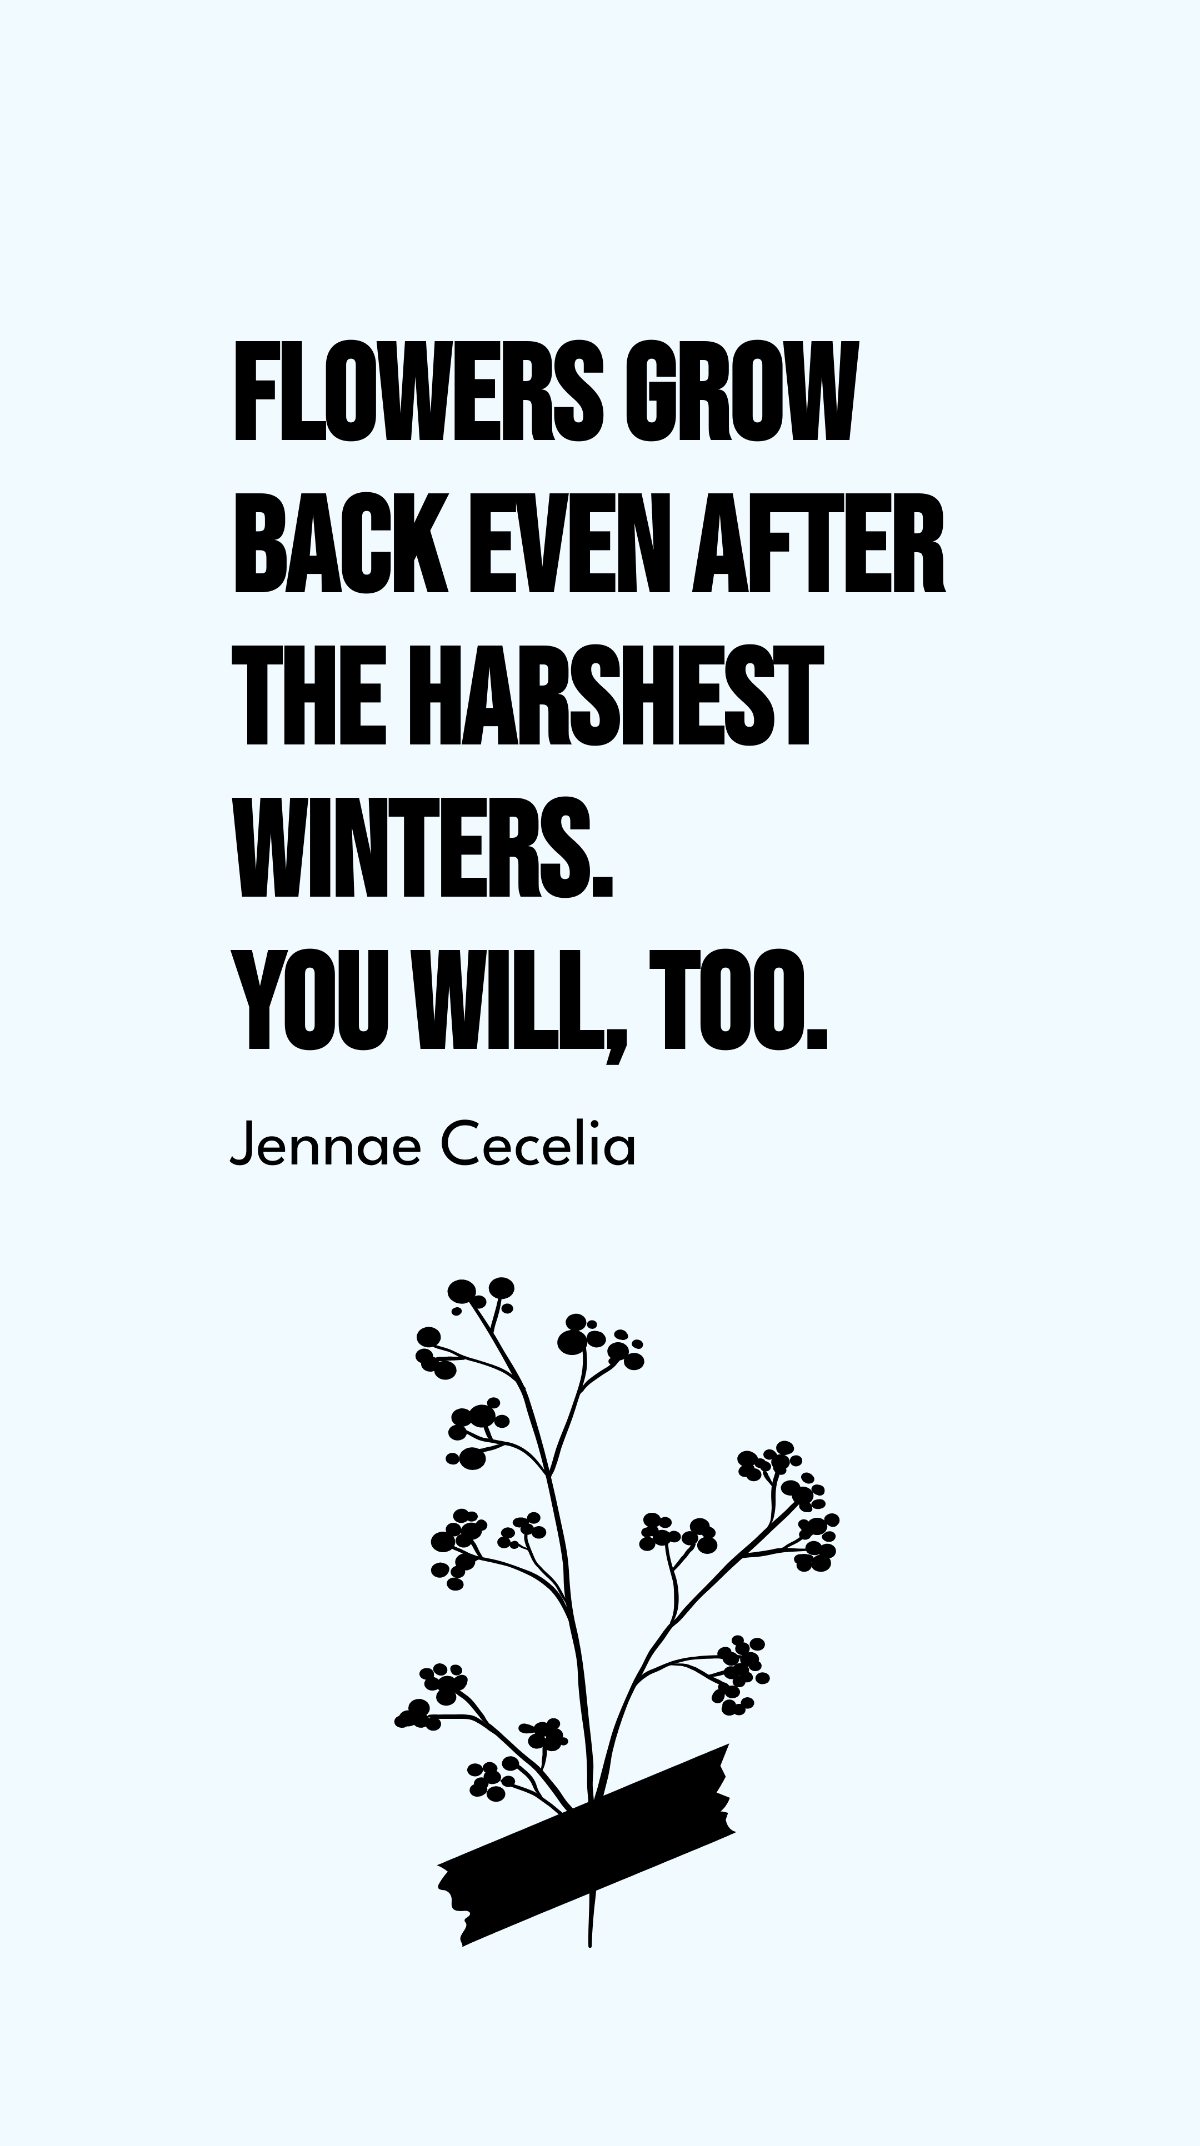 Jennae Cecelia - Flowers grow back even after the harshest winters. You will, too. Template